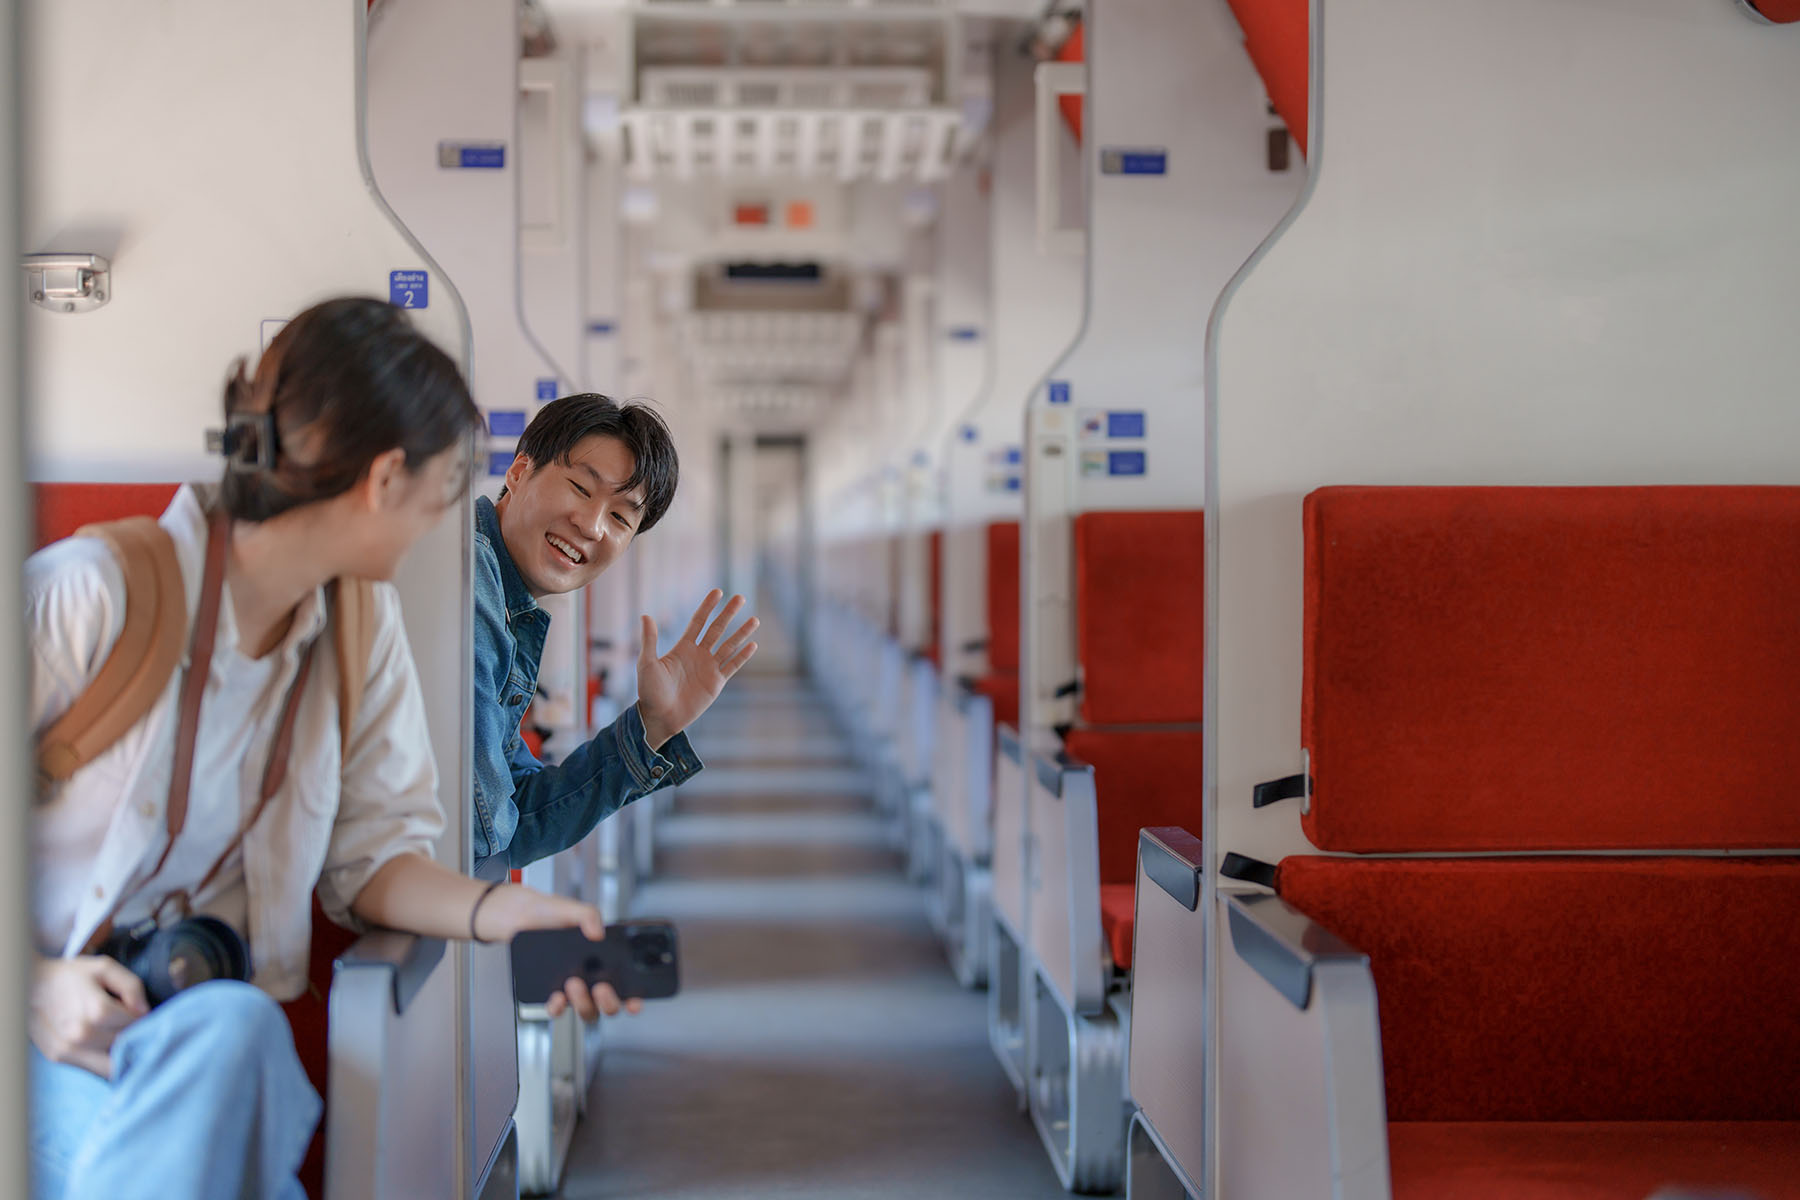 Man smiling and waving at a woman inside an empty train.